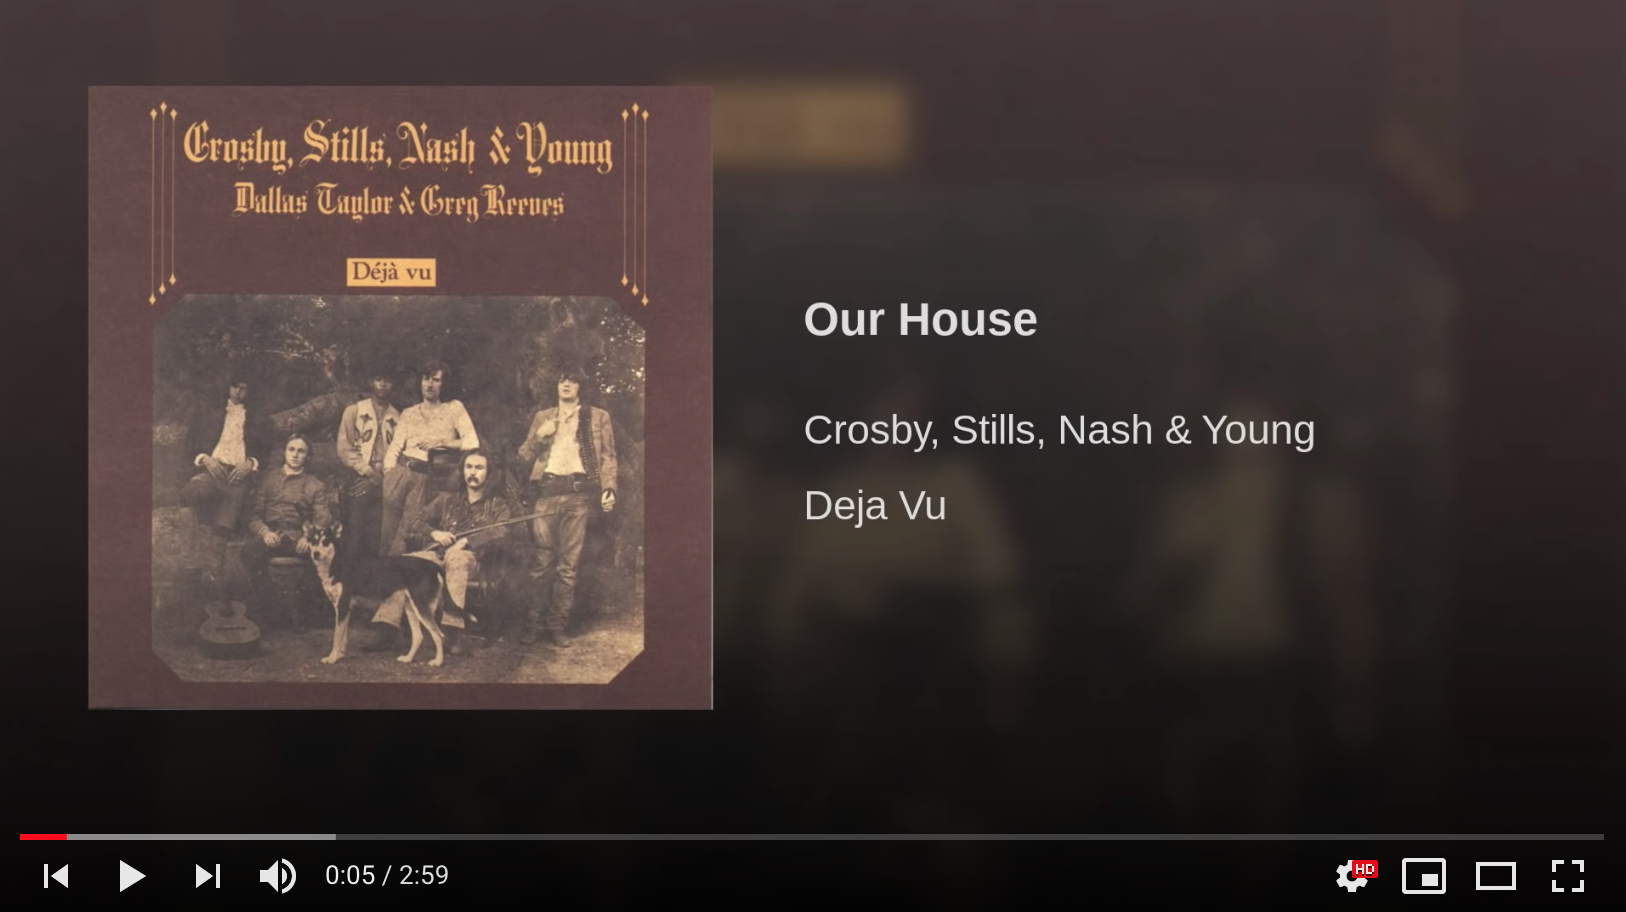 "Our House" by Crosby, Stills, Nash & Young